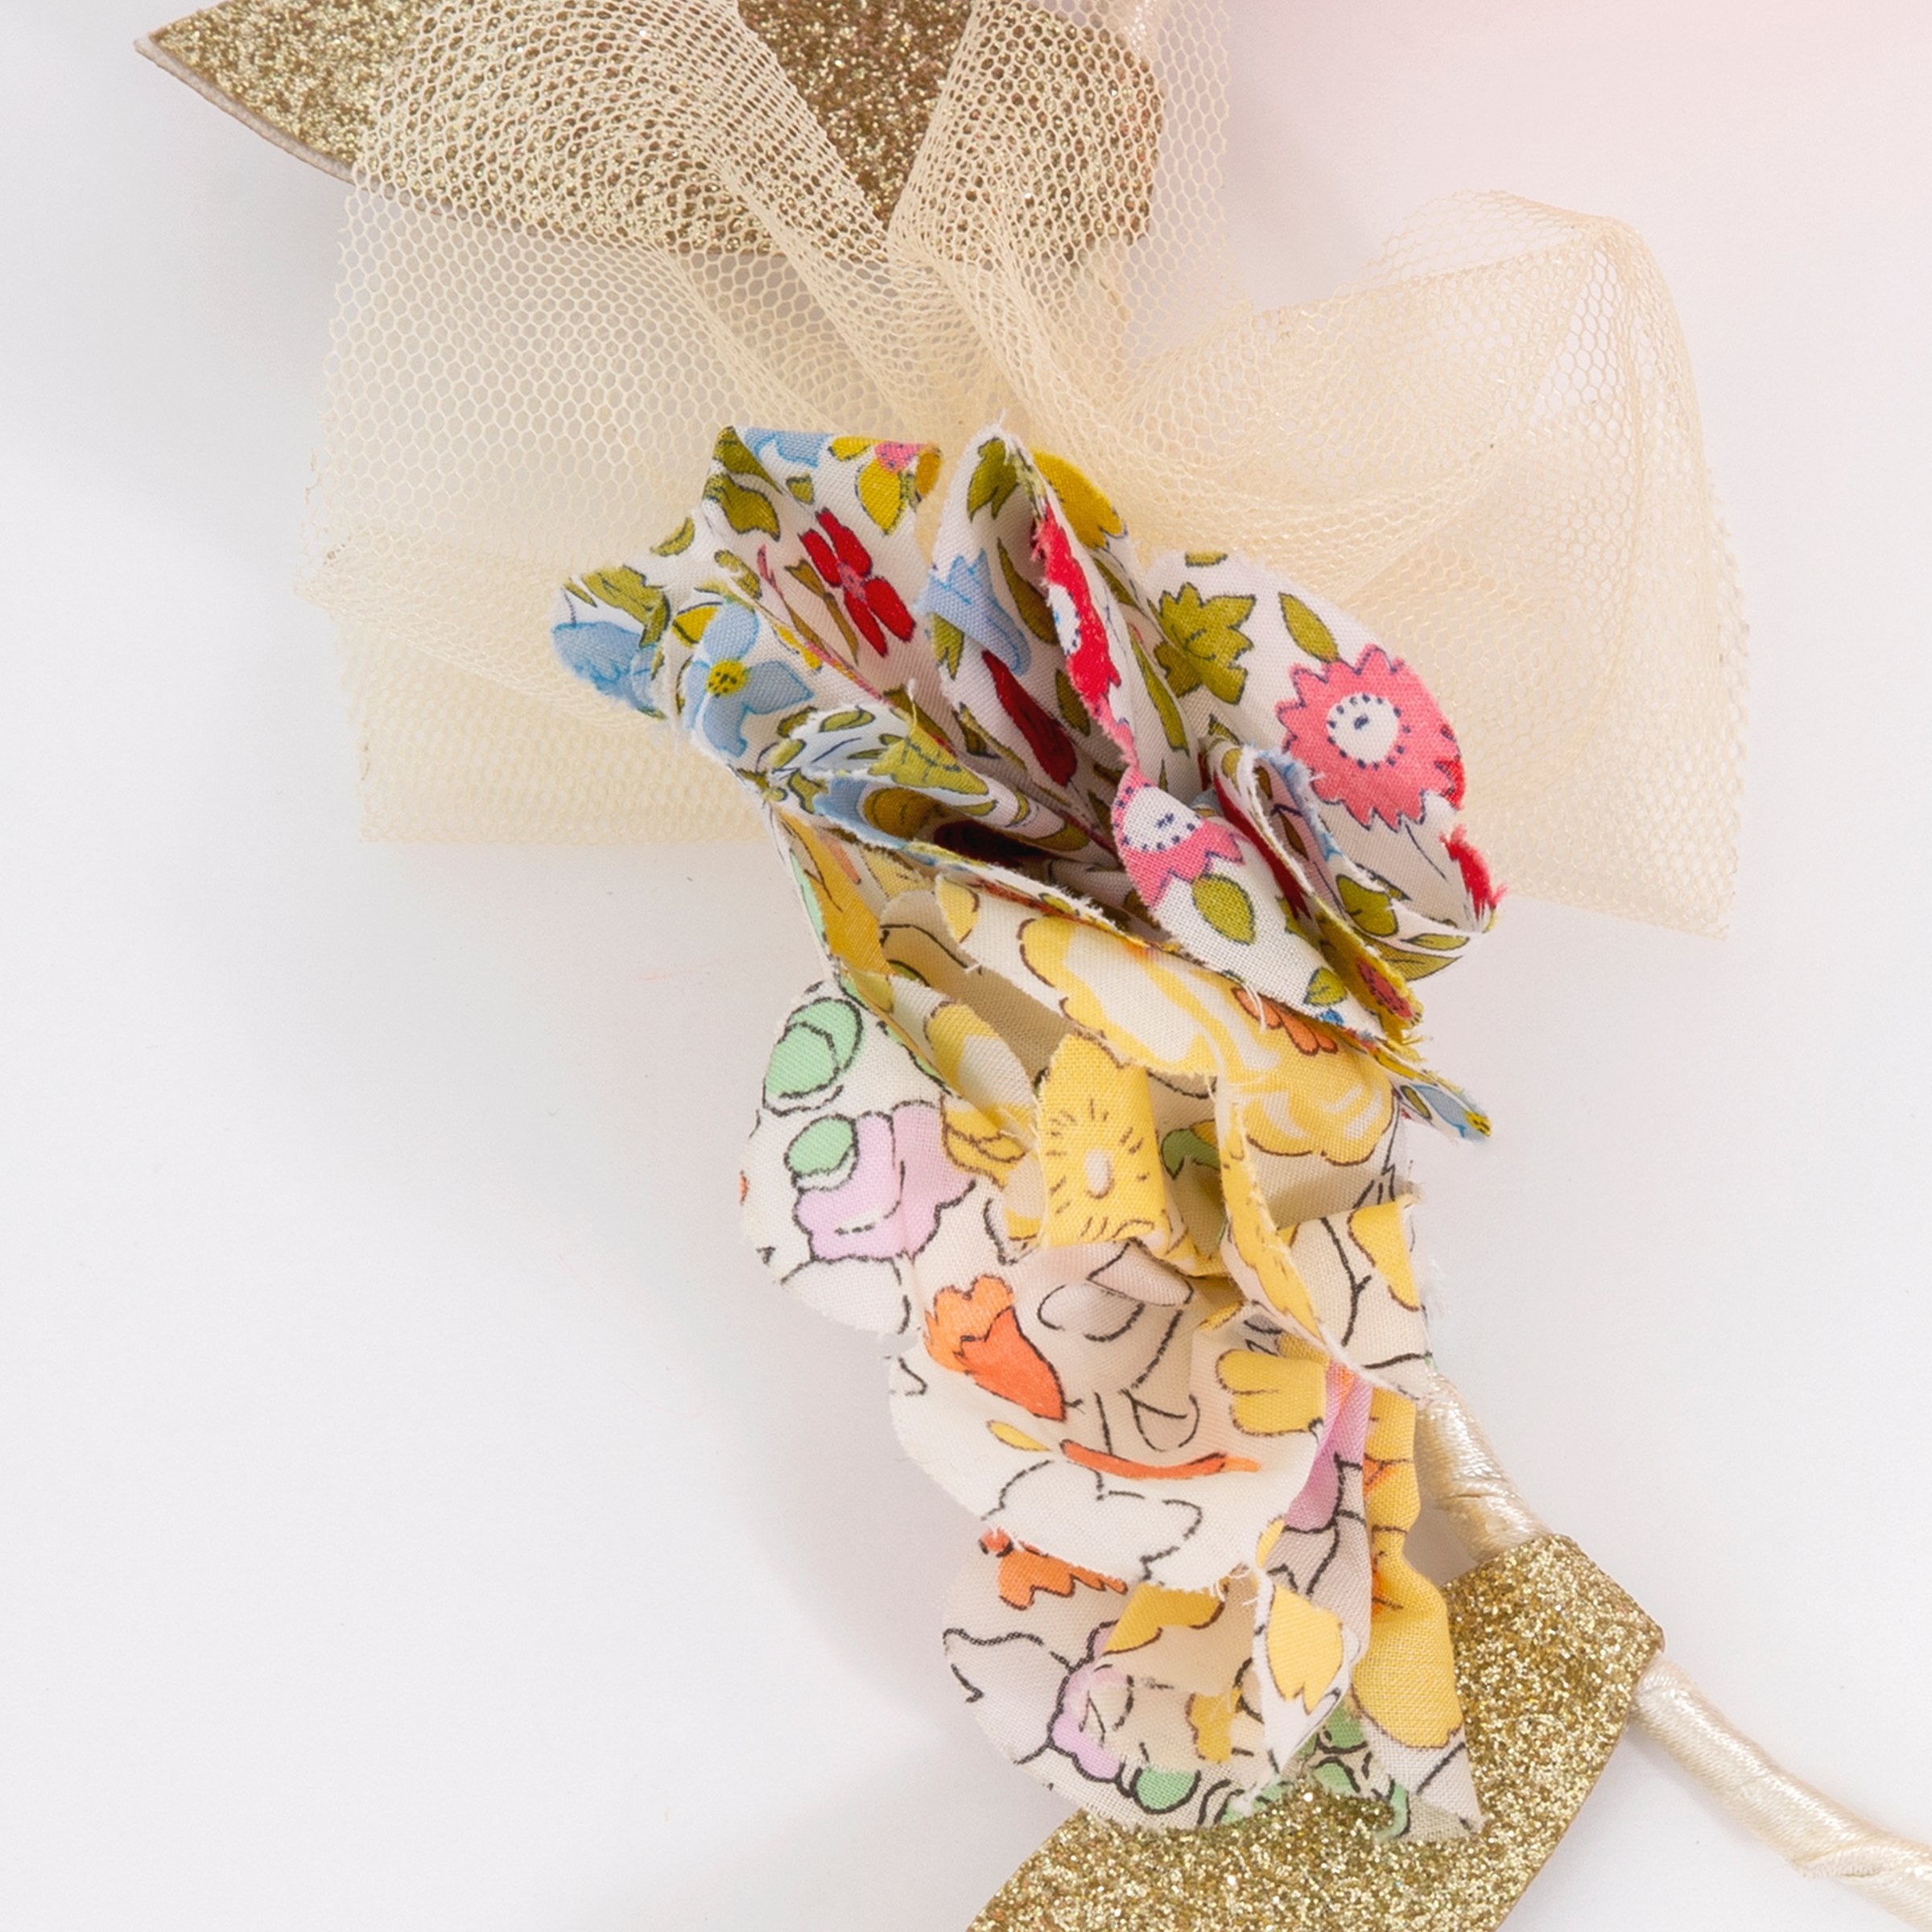 Our kids hair accessory, made in the shape of a crown with paper flowers, is ideal to give the perfect party hair.